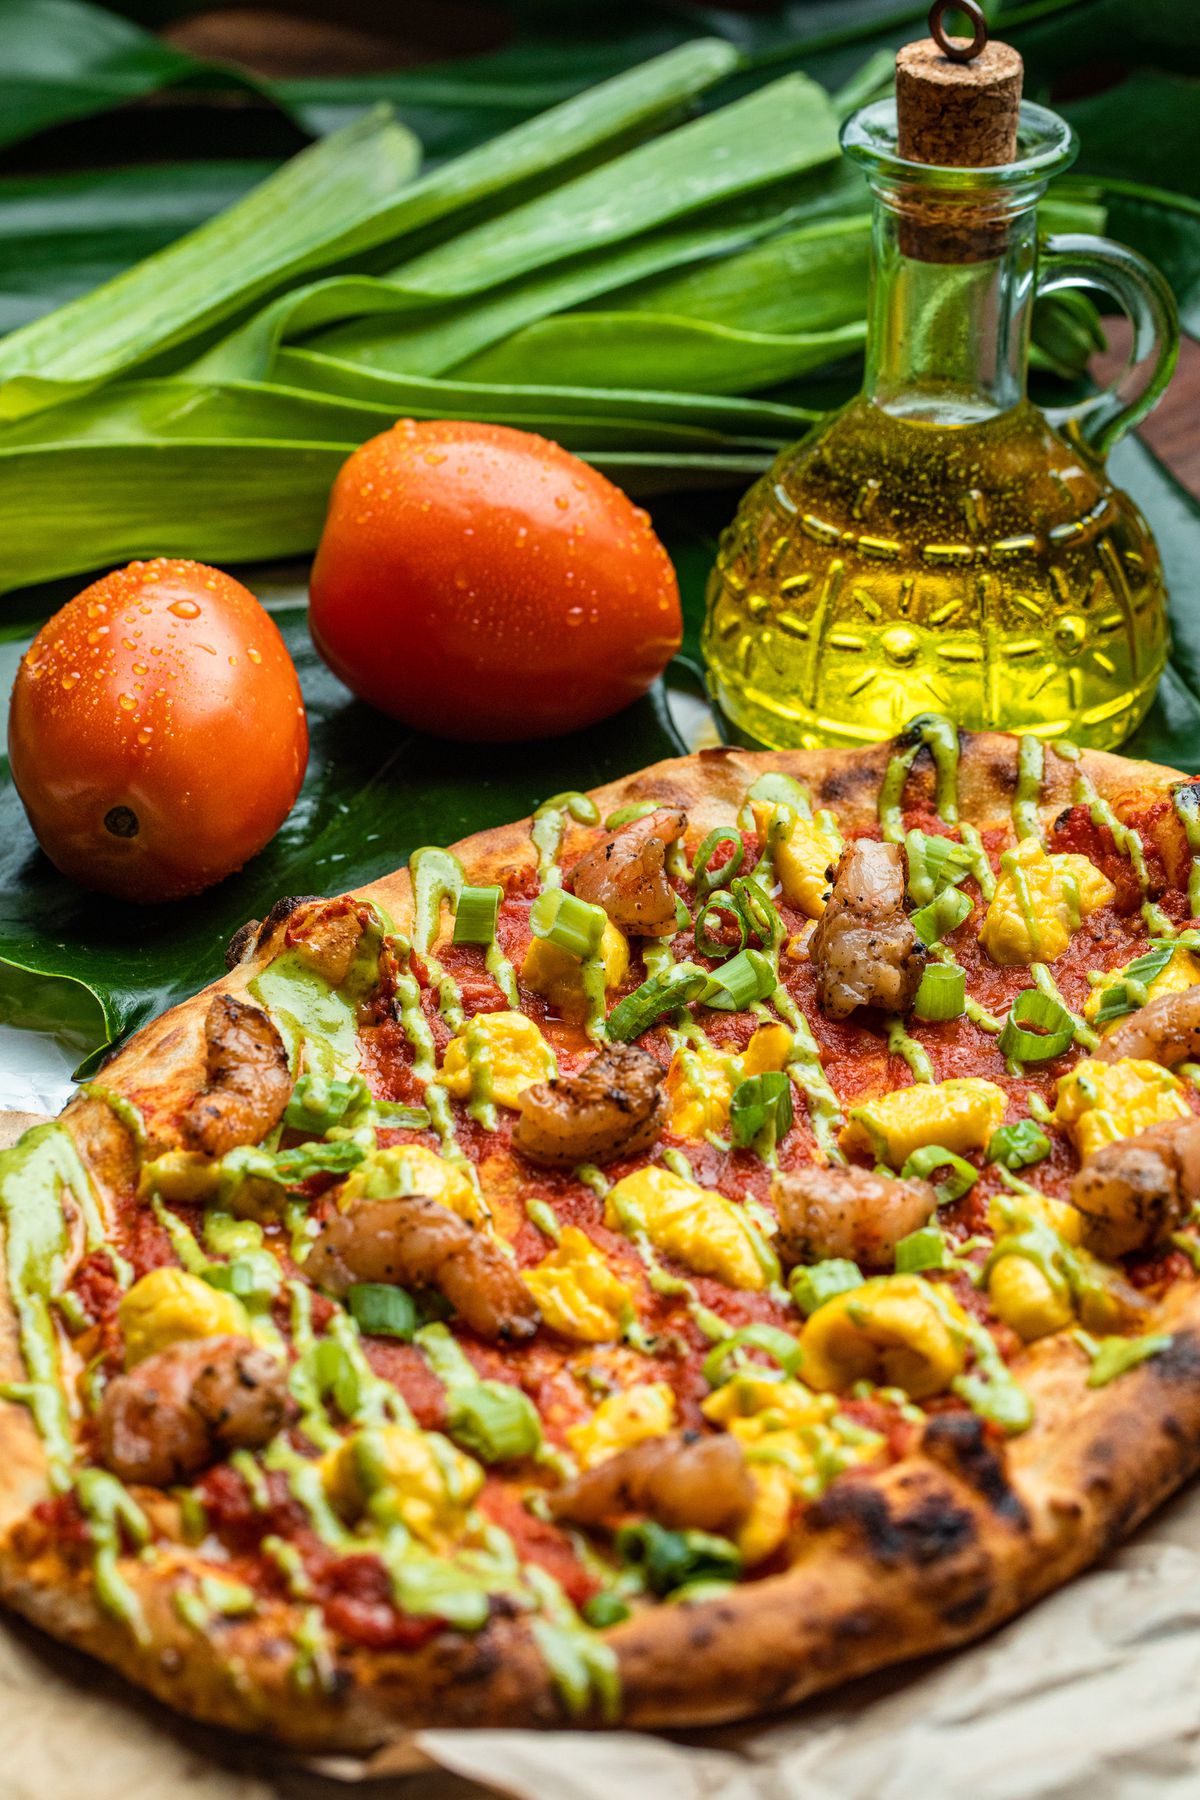 A close-up photograph of a flatbread pizza topped with meat, sauce, and green vegetables. In the background, two tomatoes sit next to a bottle of oil.